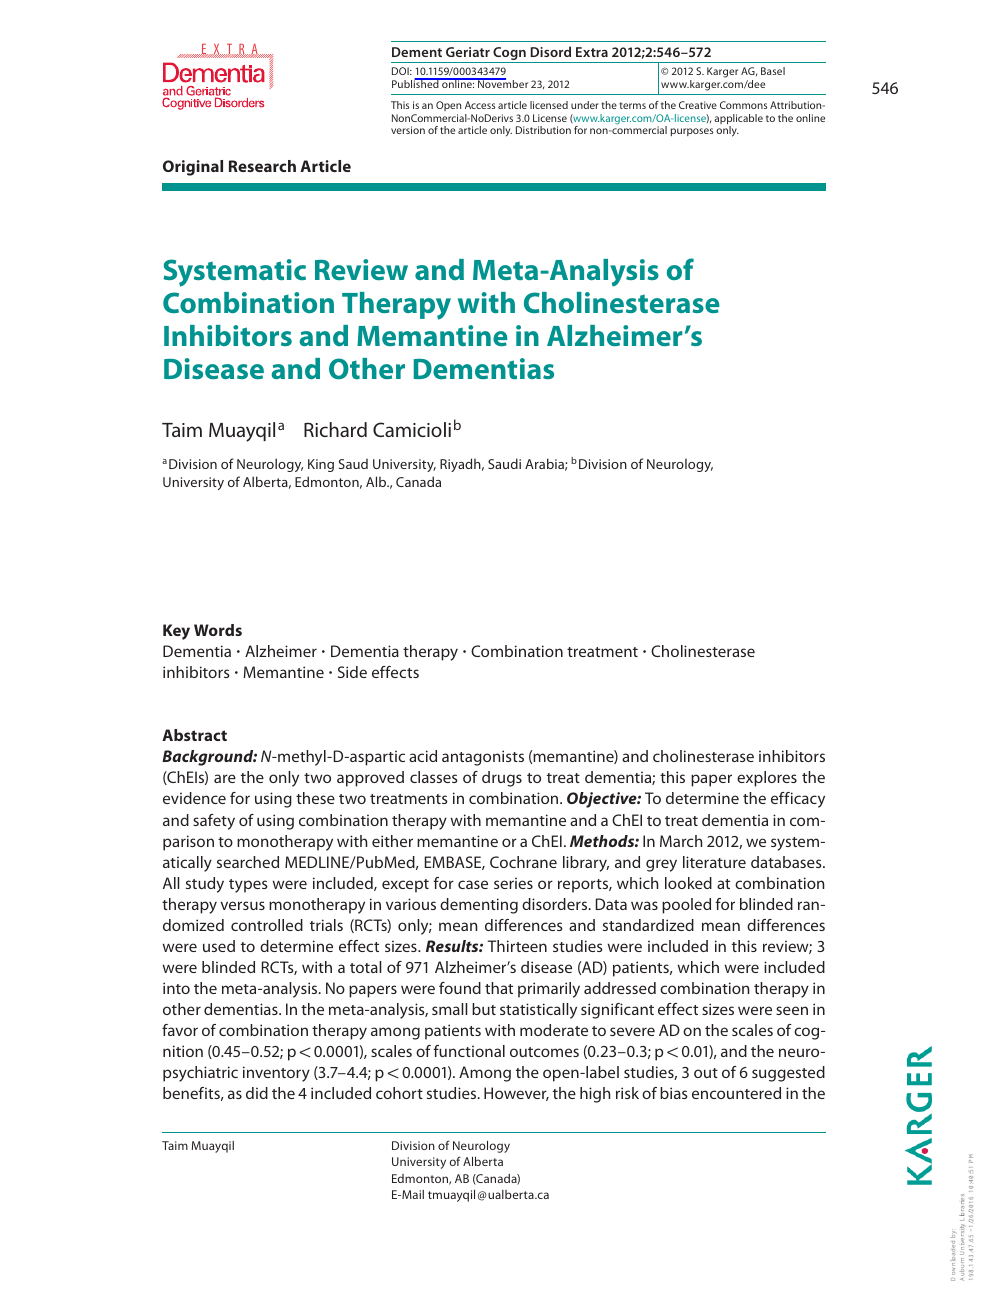 Systematic Review And Meta Analysis Of Combination Therapy With Cholinesterase Inhibitors And Memantine In Alzheimer S Disease And Other Dementias Topic Of Research Paper In Clinical Medicine Download Scholarly Article Pdf And Read